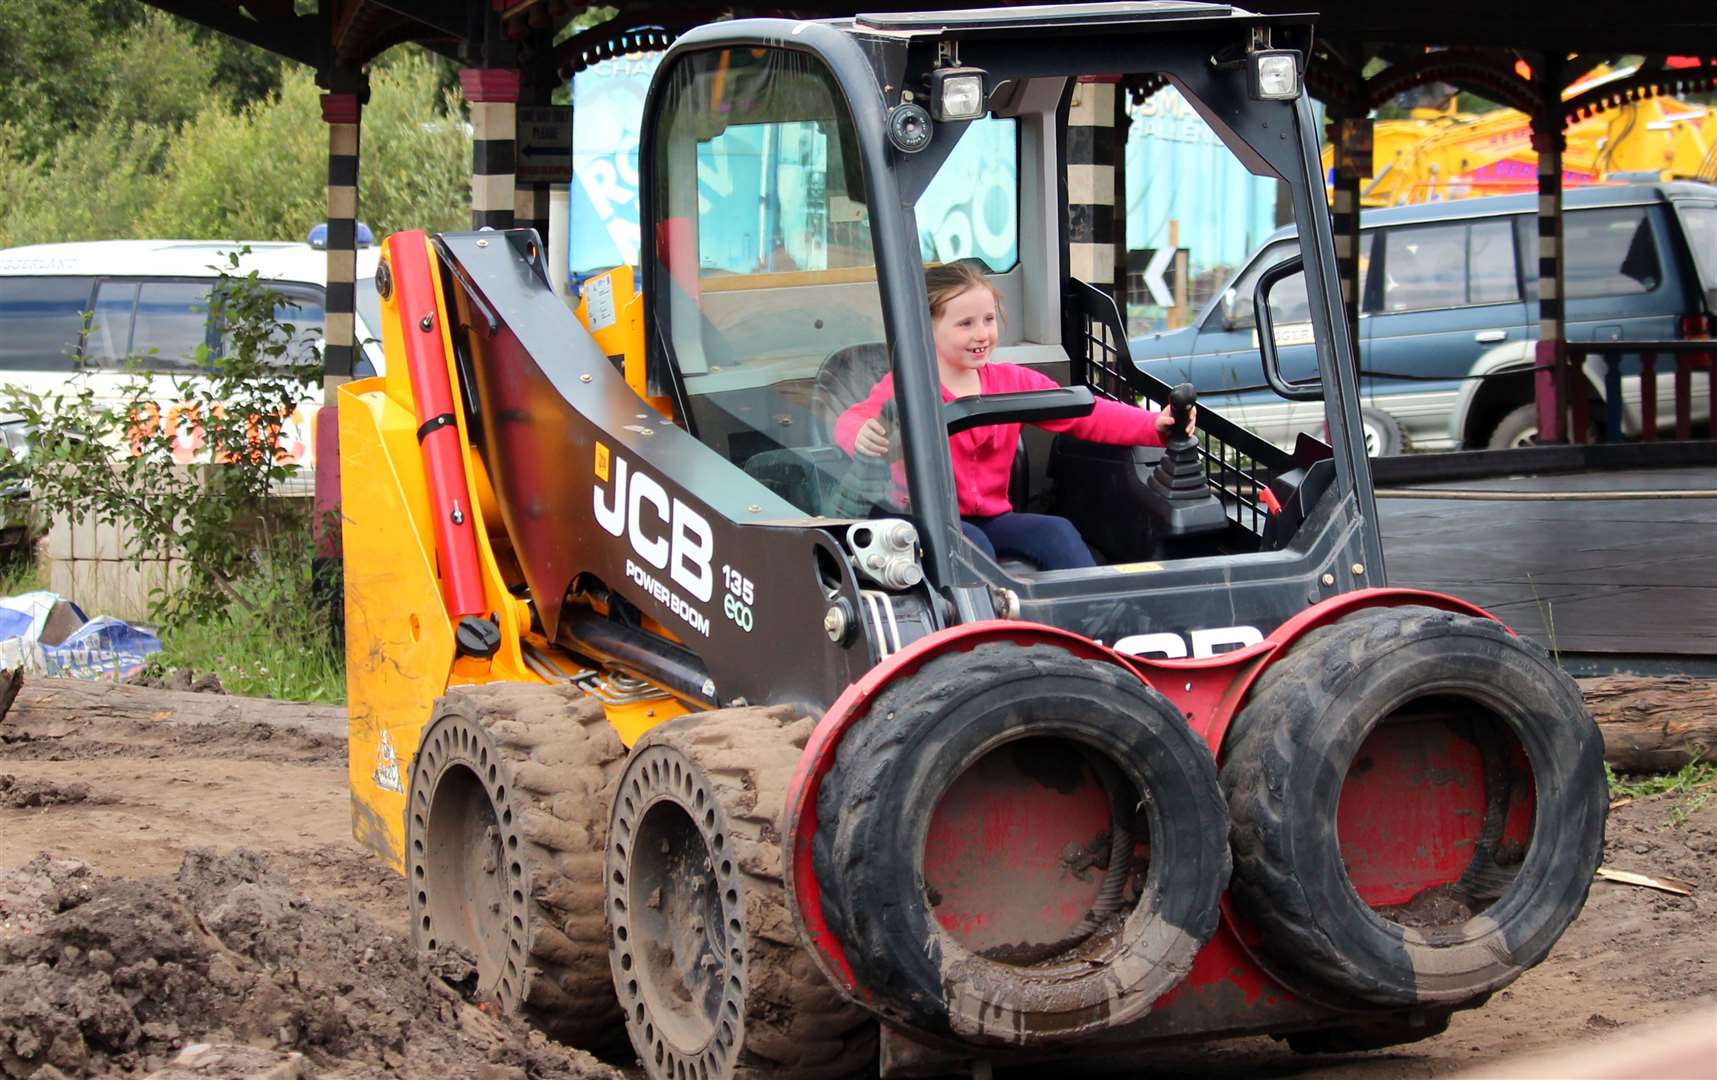 The Diggerland outing is a prize in this year's writing competition